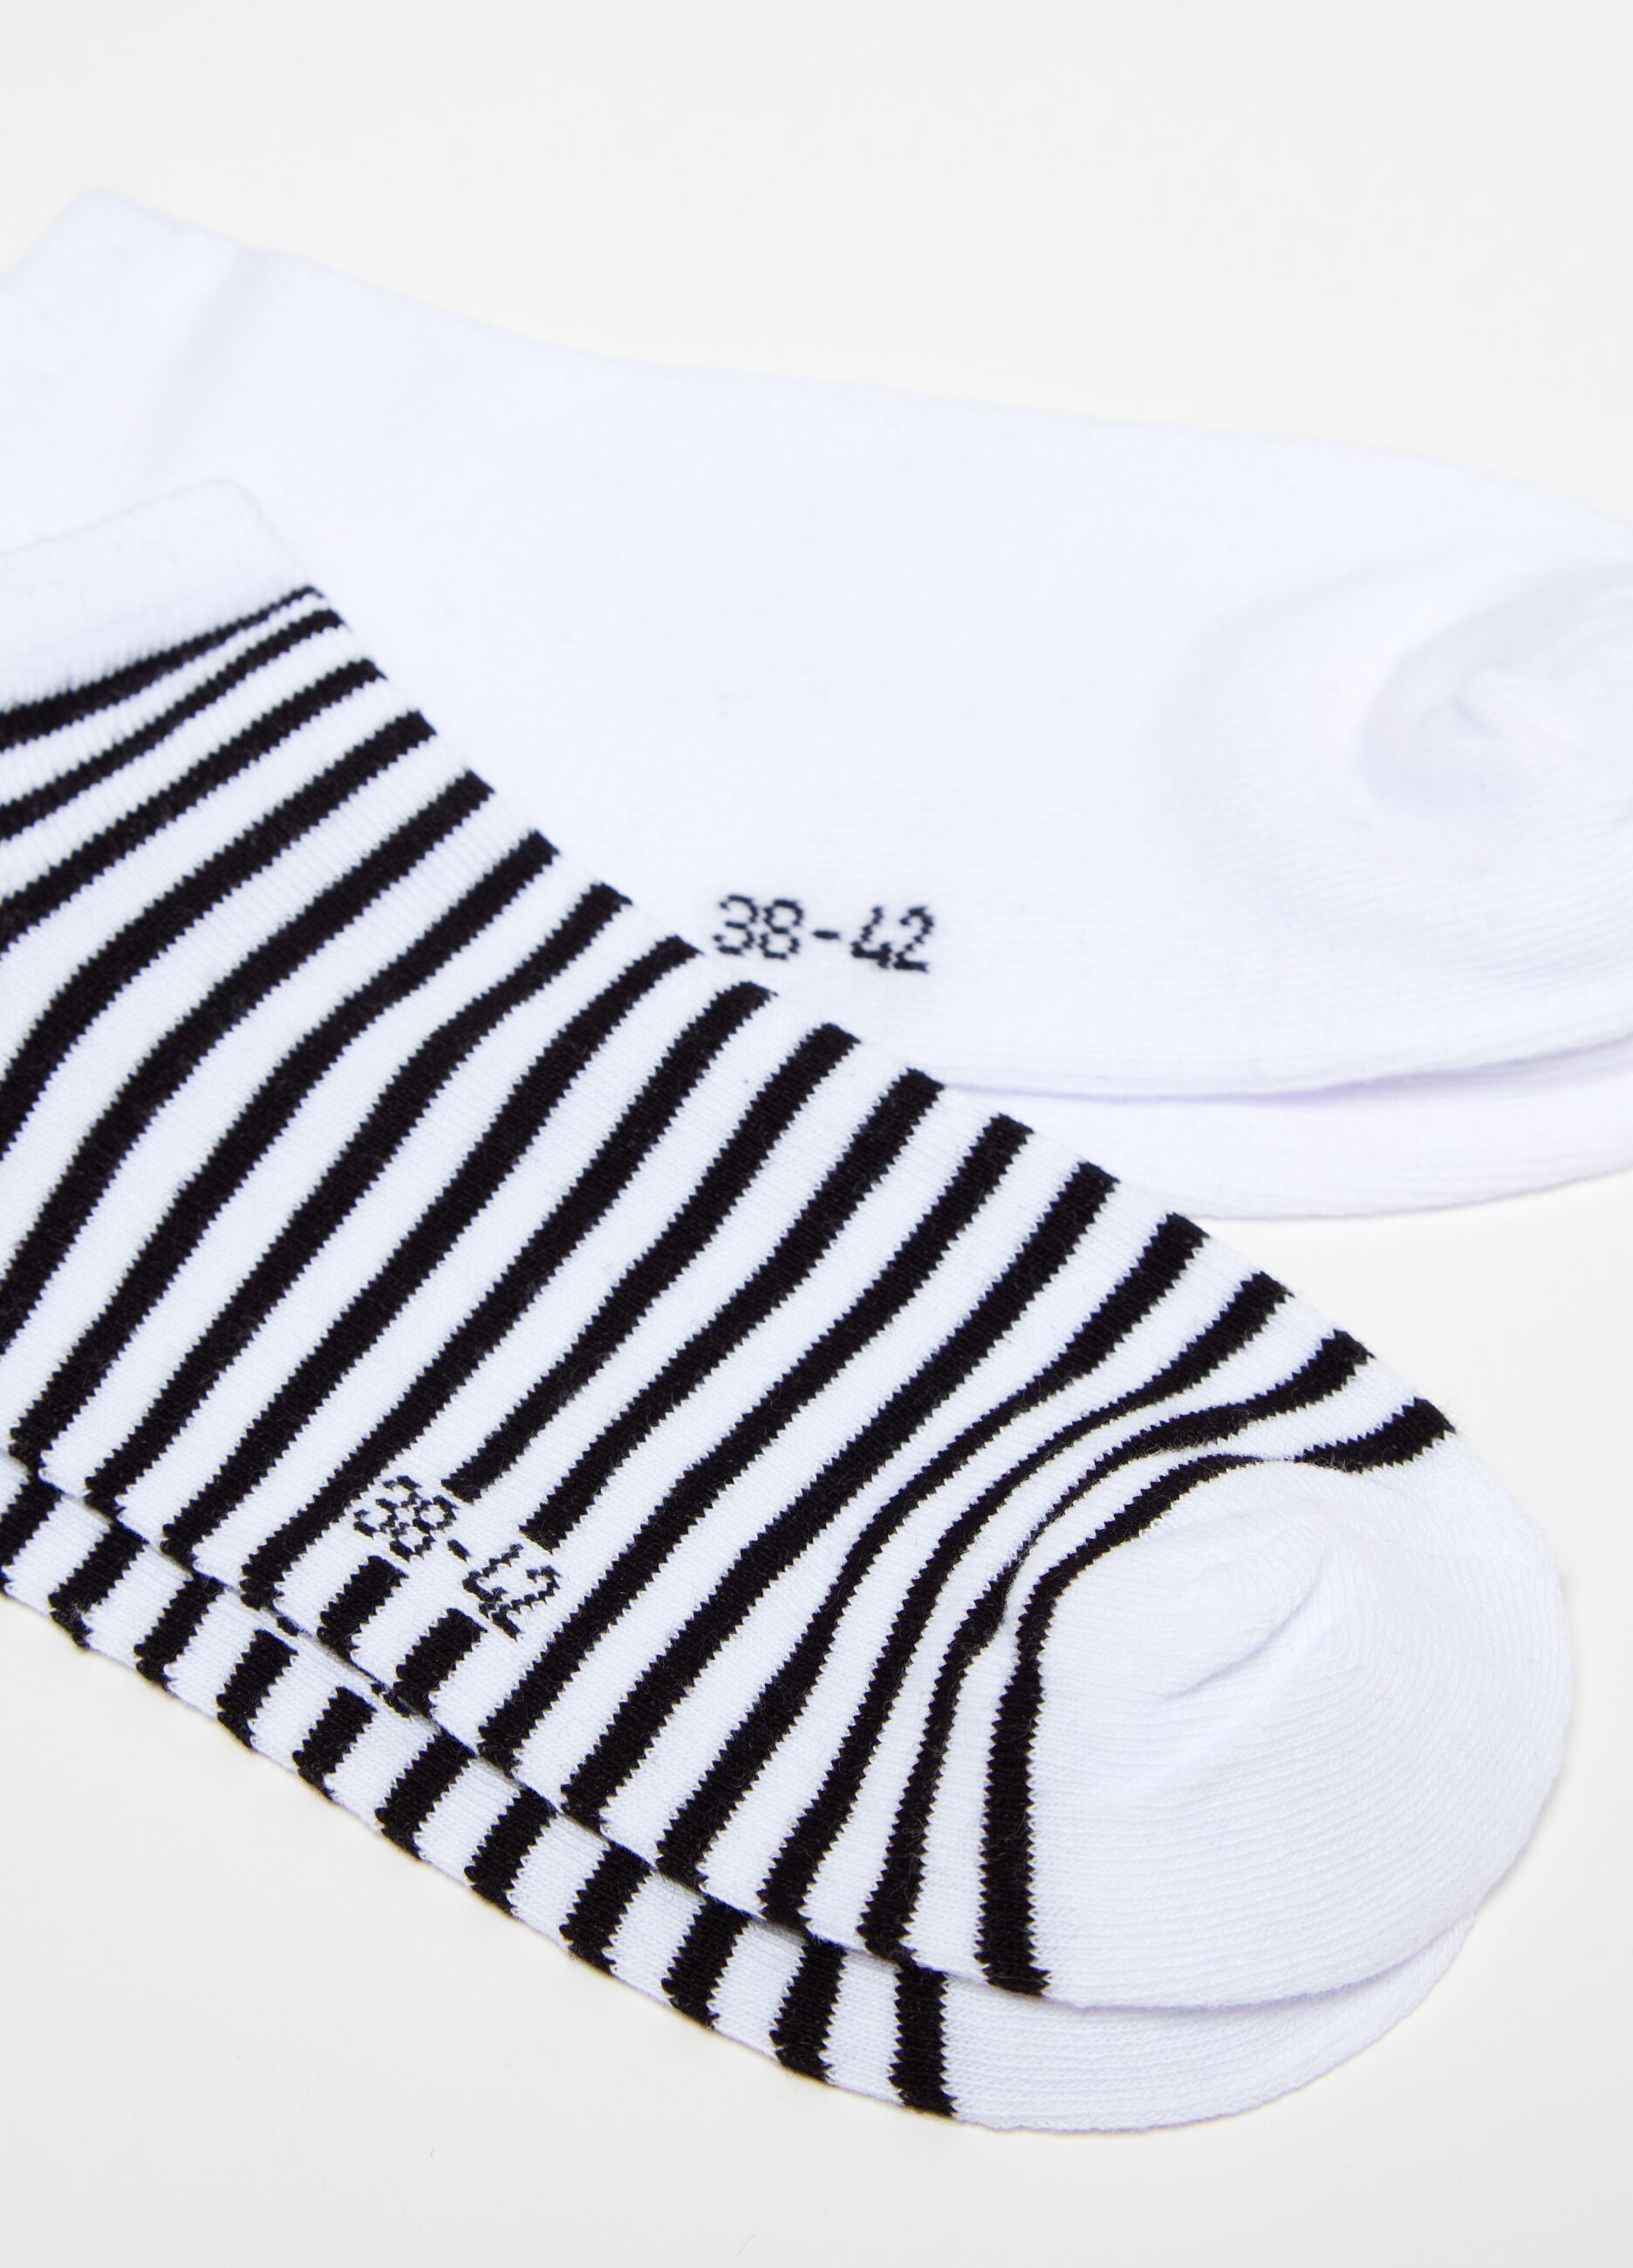 Three-pair pack shoe liners with striped design